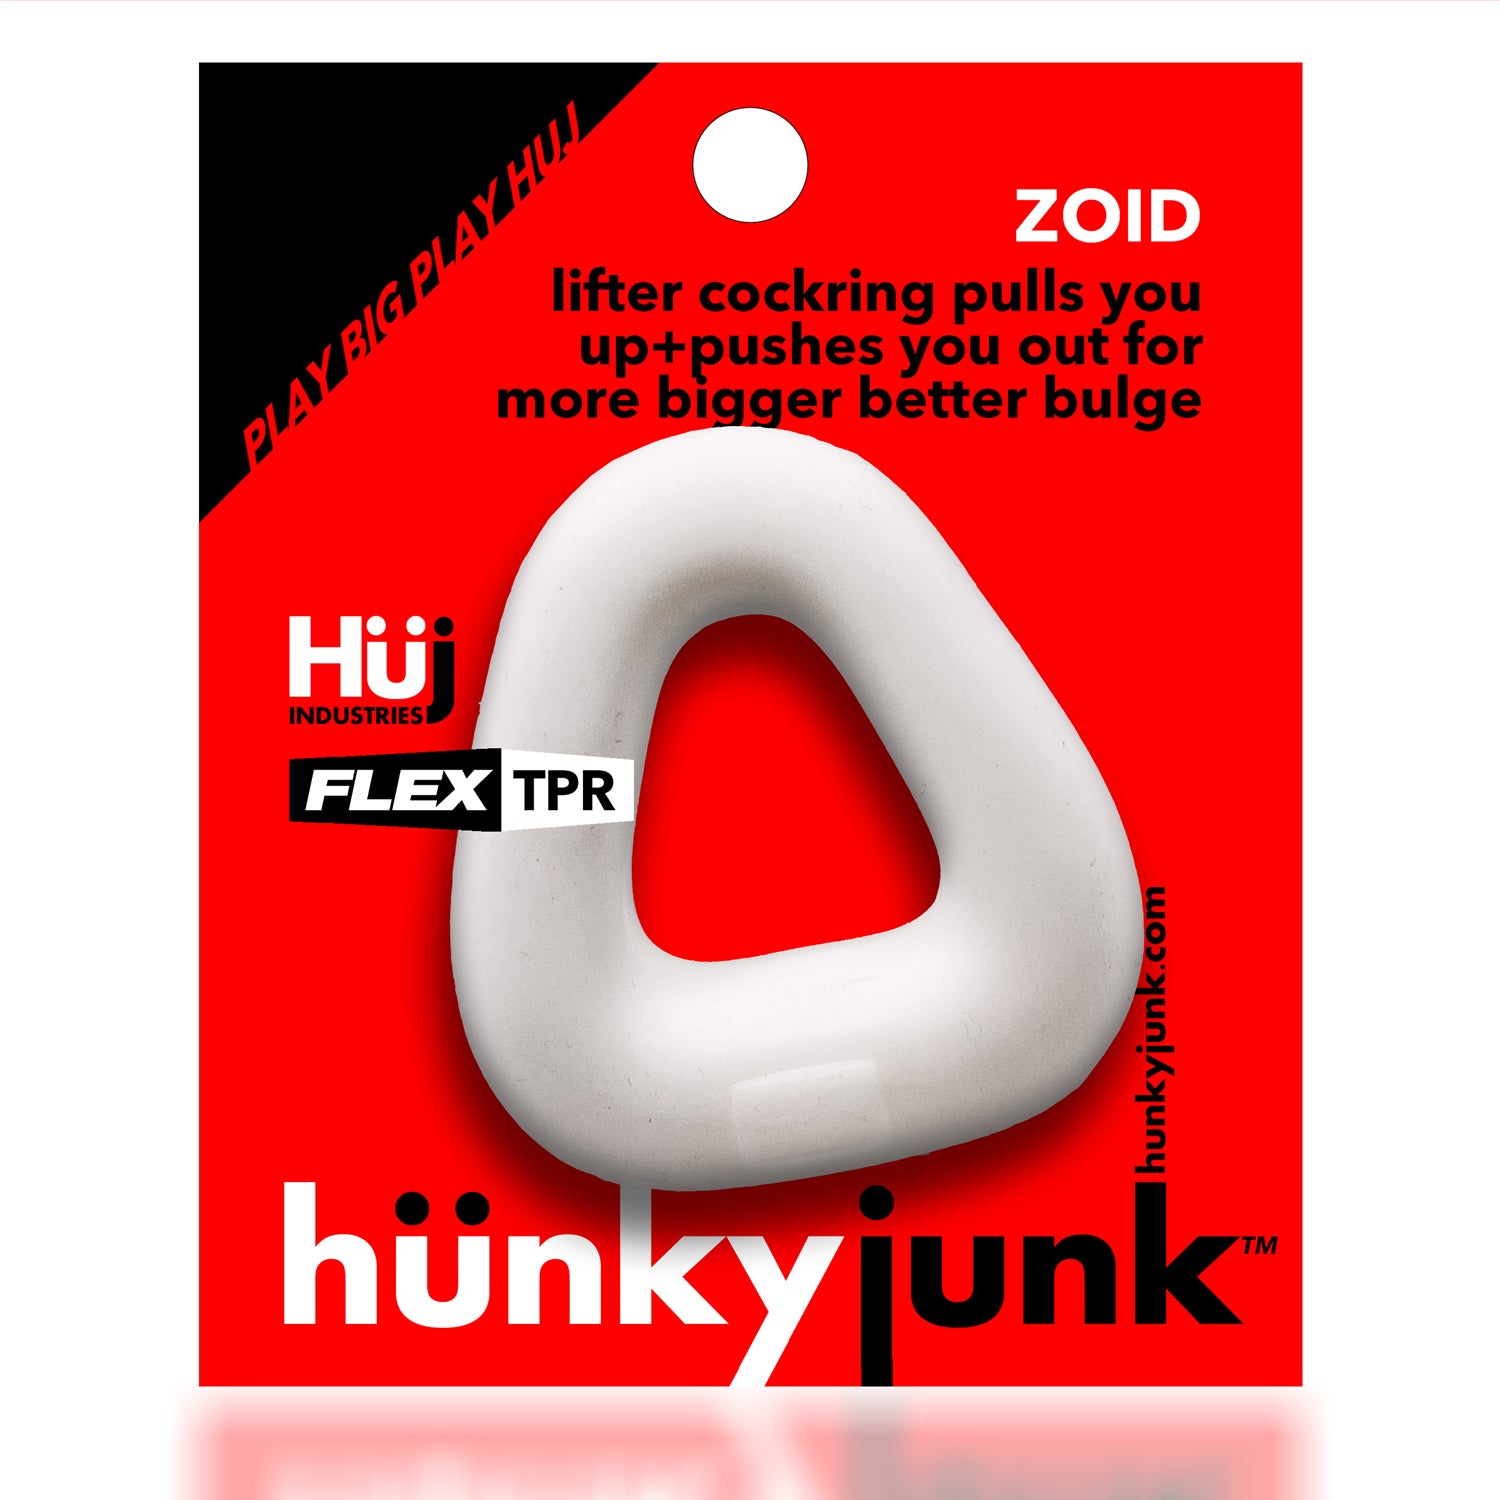 Hunkyjunk ZOID Trapaziod Lifter Cockring